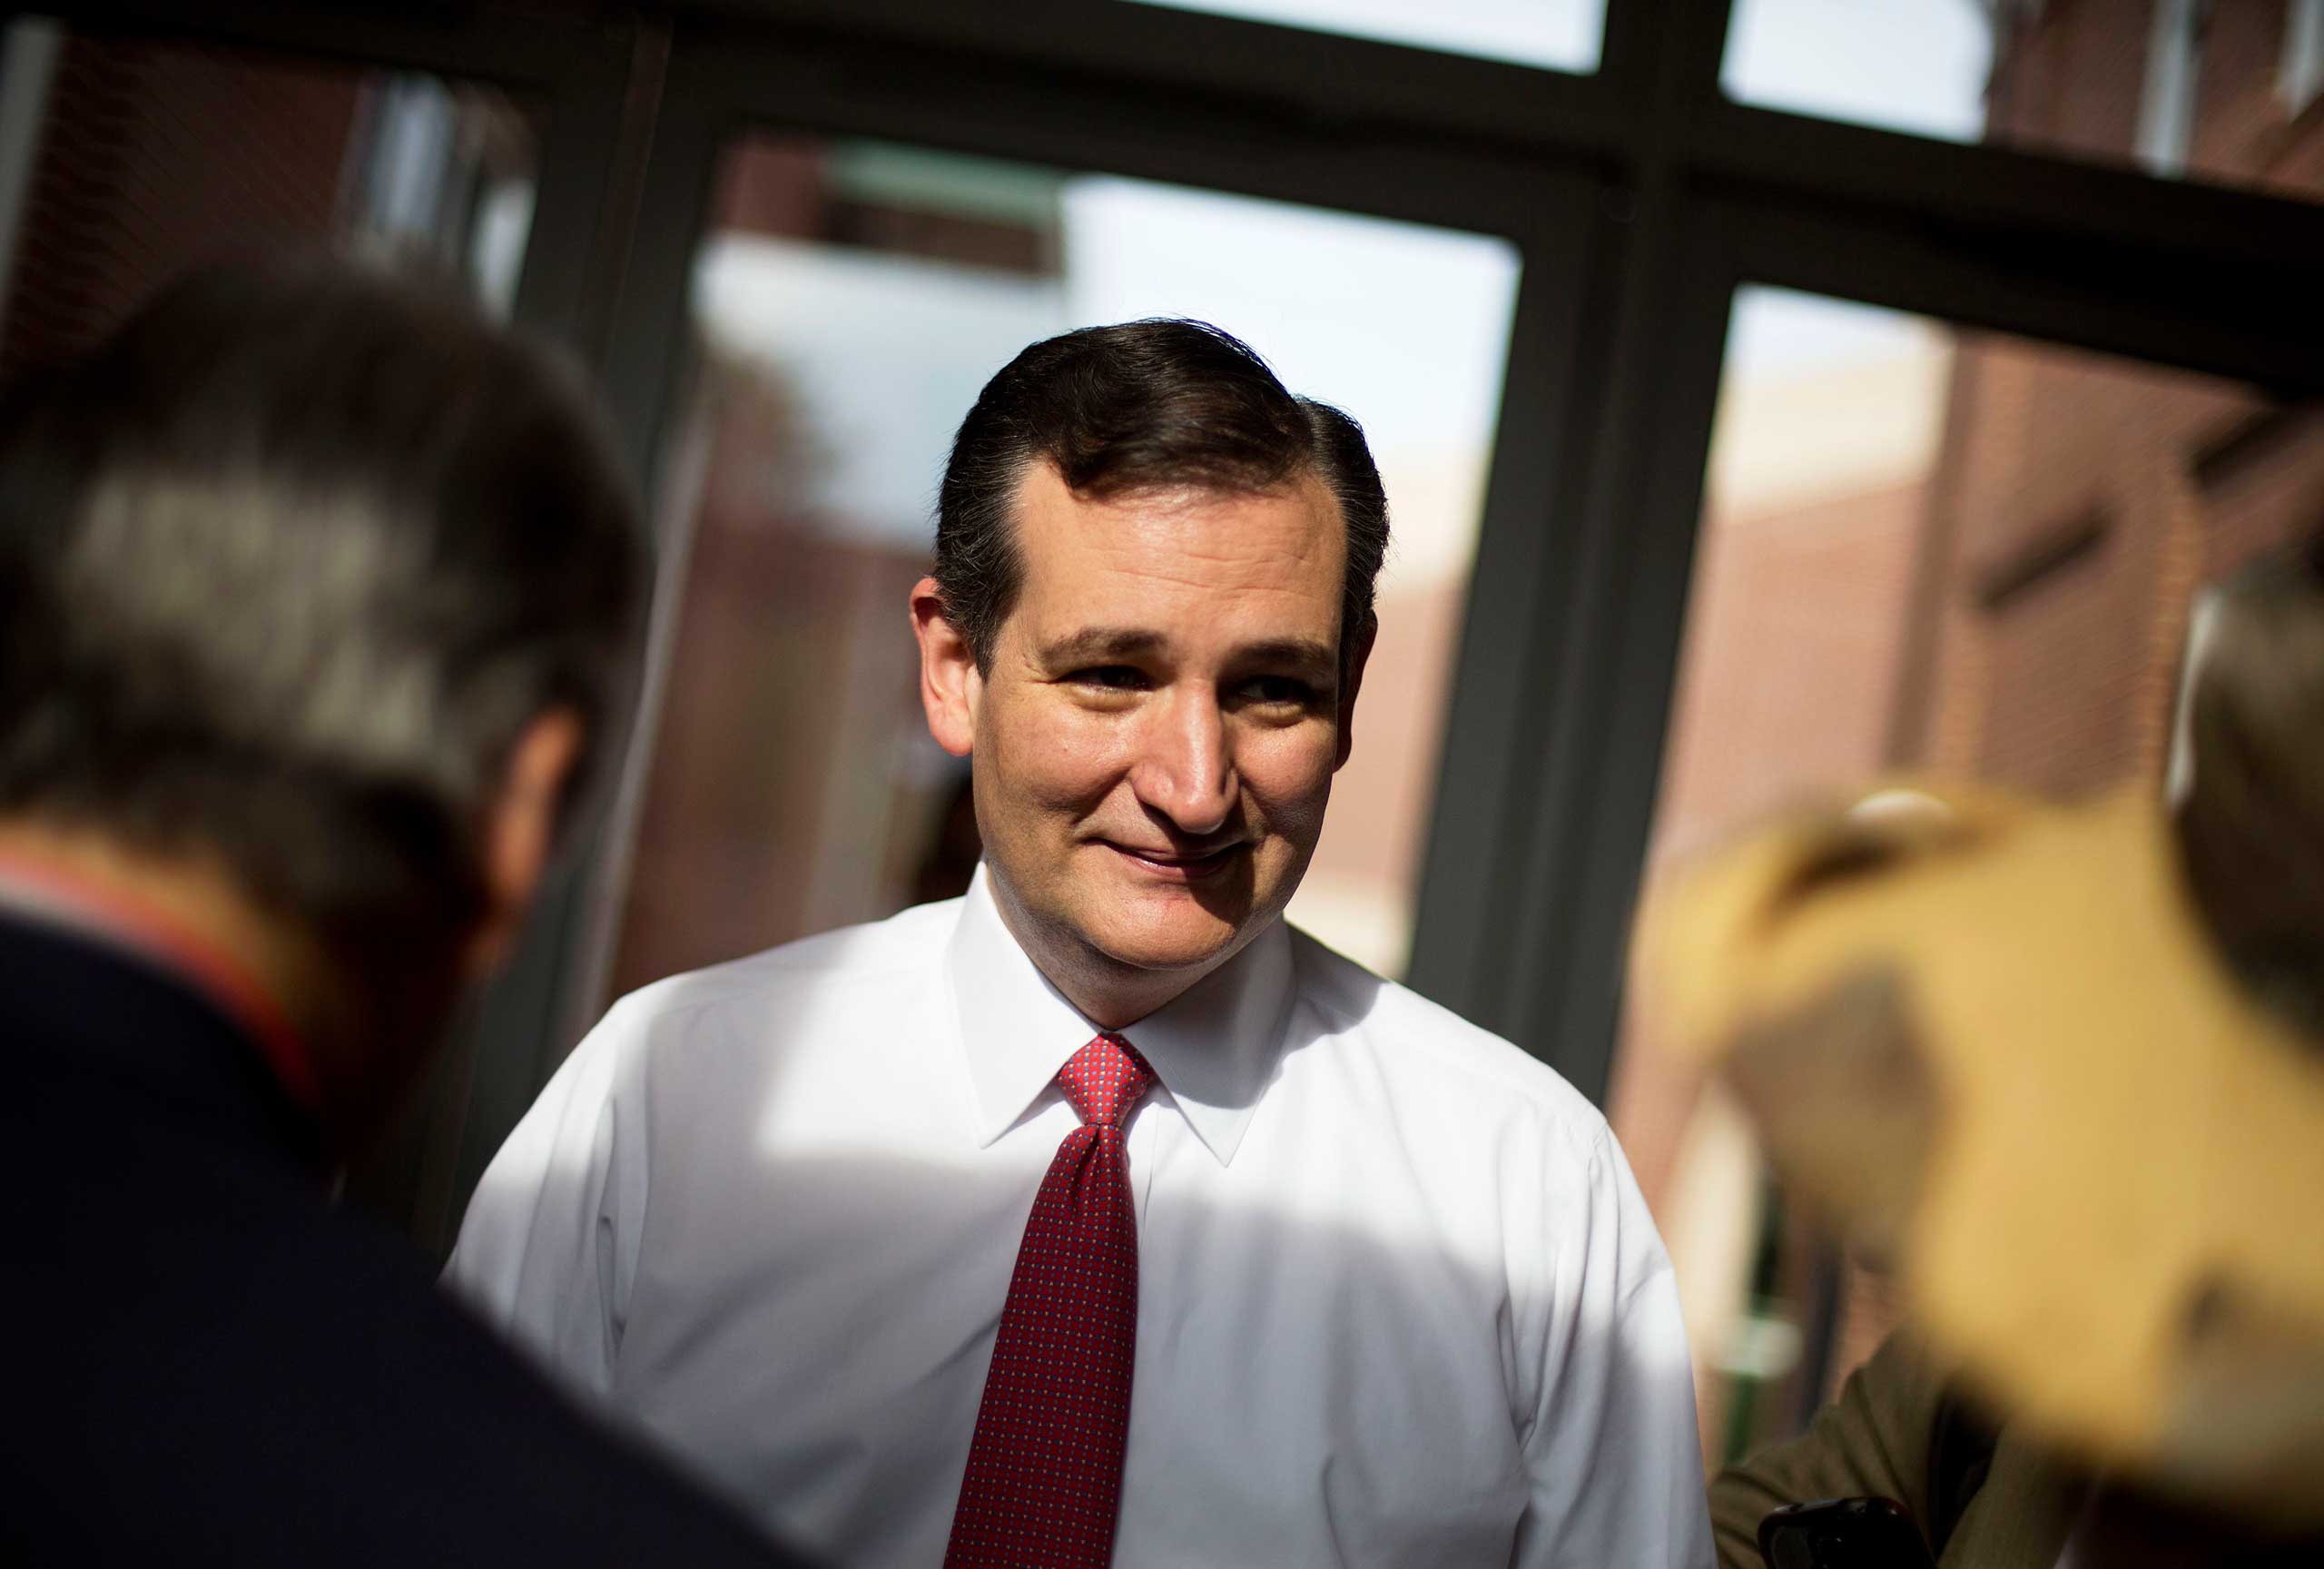 Republican presidential candidate Sen. Ted Cruz greets supporters at the Georgia Republican Convention in Athens, Ga. on May 15, 2015. (David Goldman—AP)